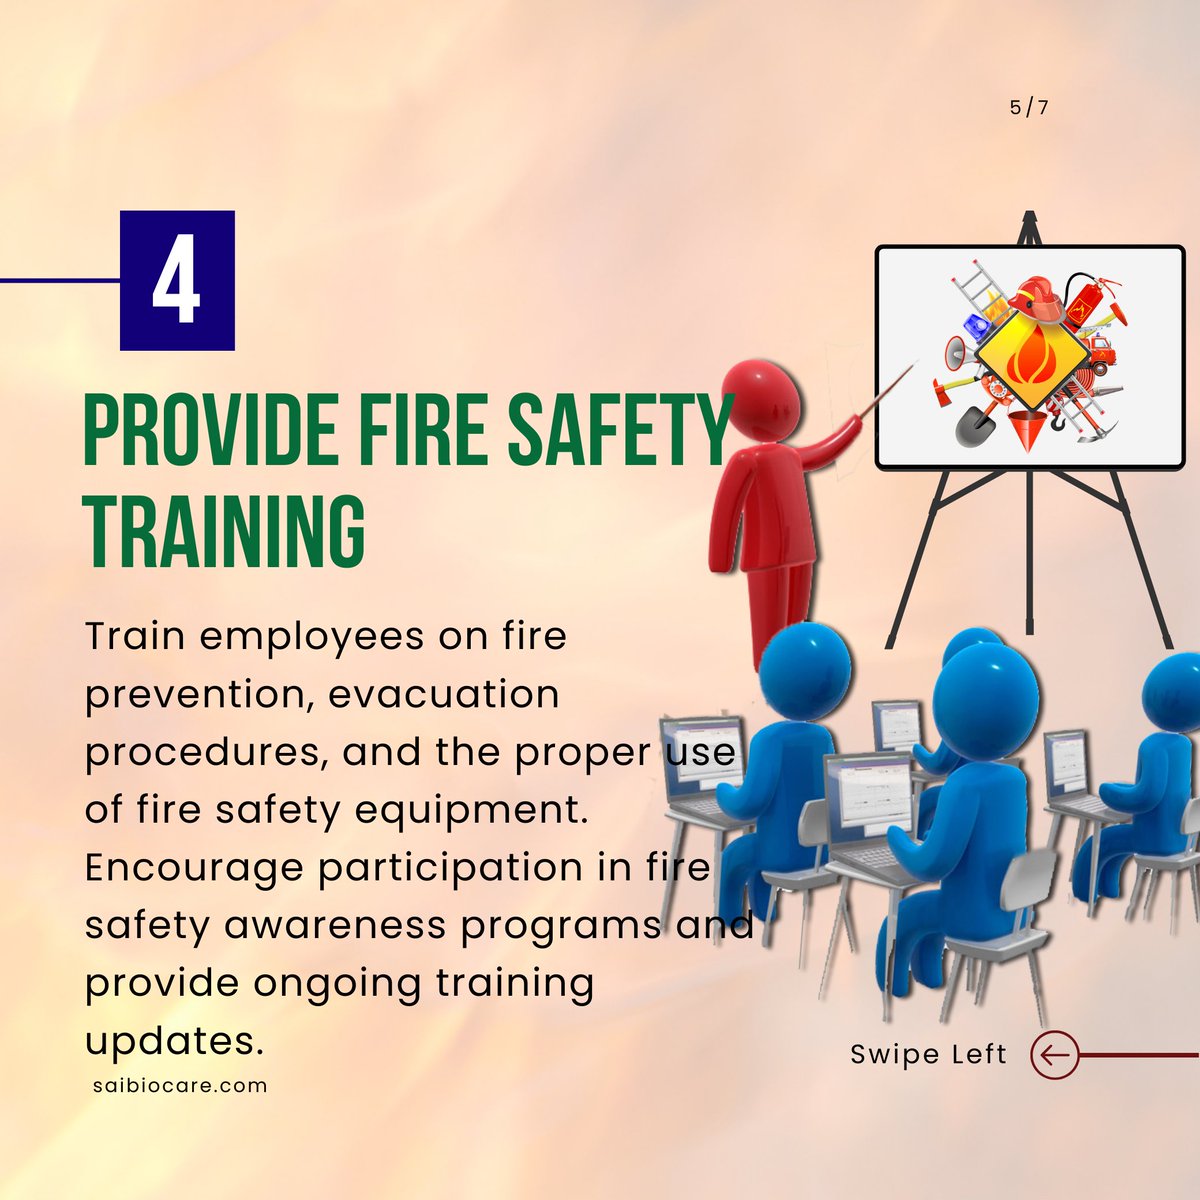 Protect your workplace with these 5 essential fire safety tips: risk assessments, detection systems, evacuation procedures, training, and equipment maintenance.
.
.
.
#firesafety #workplacesafety #fireprevention #emergencypreparedness #safetyfirstalways #firefighting #saibiocare